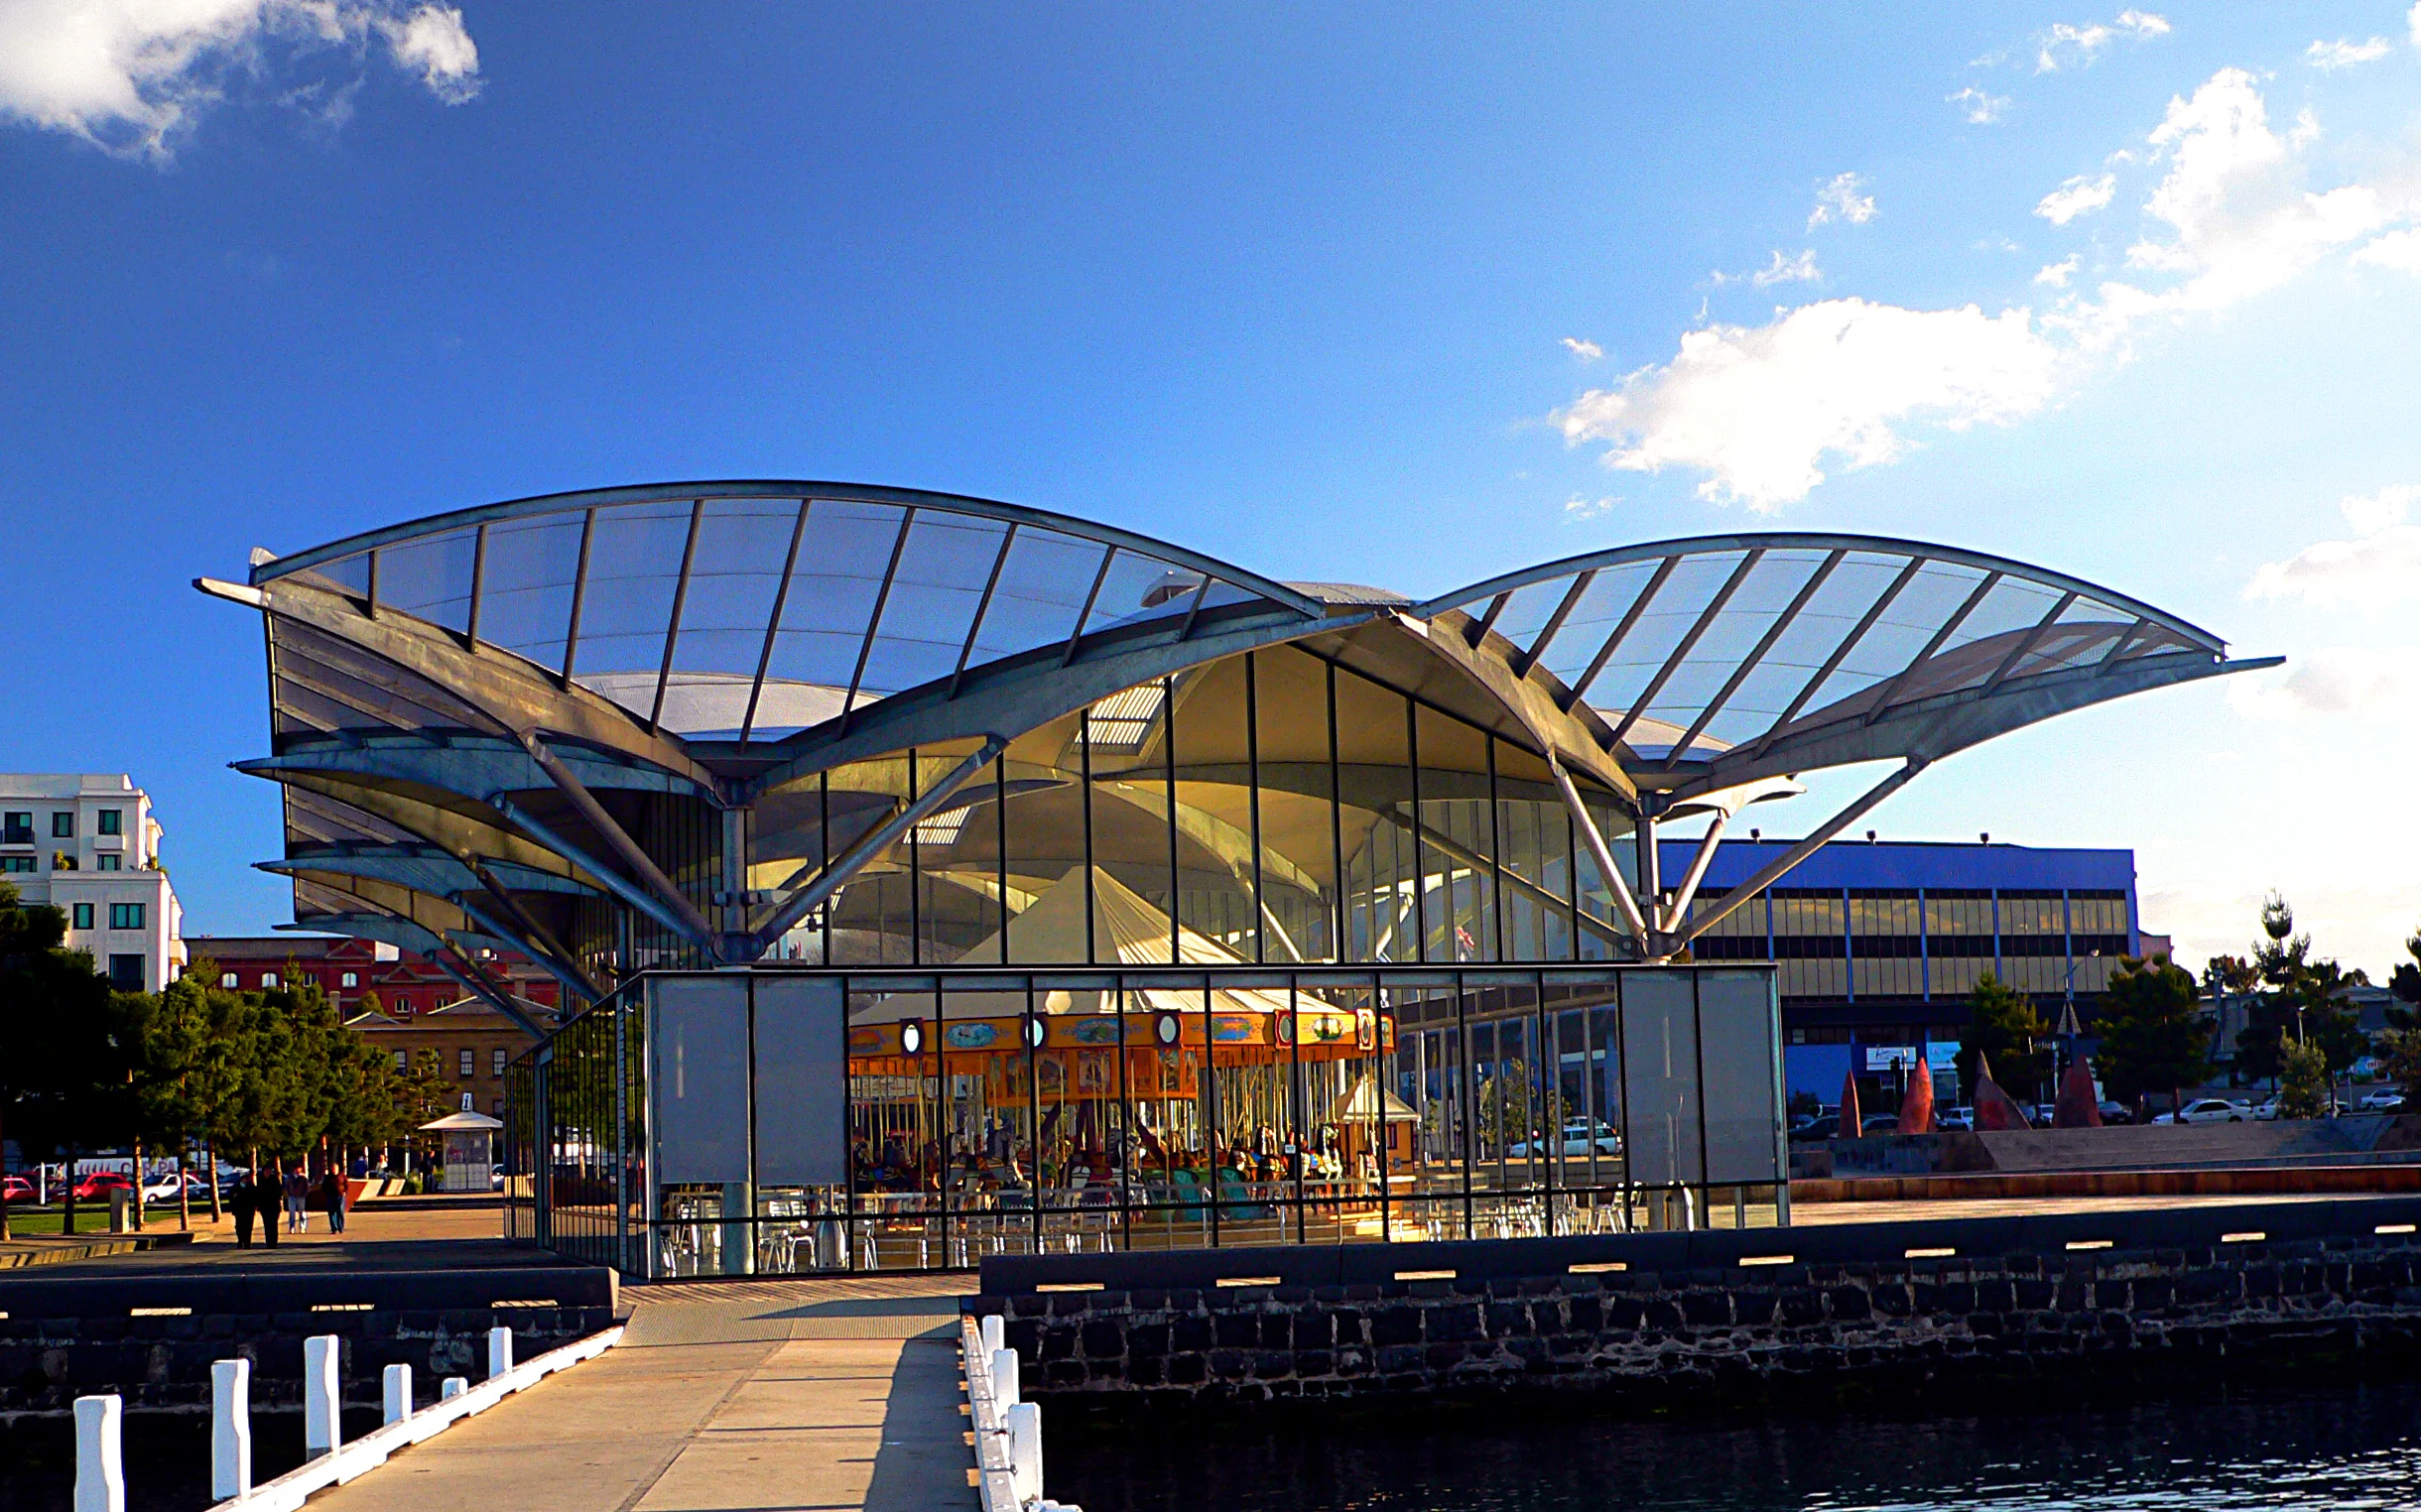 The Carousel Pavilion on the Geelong Waterfront. The home of the restored carousel.